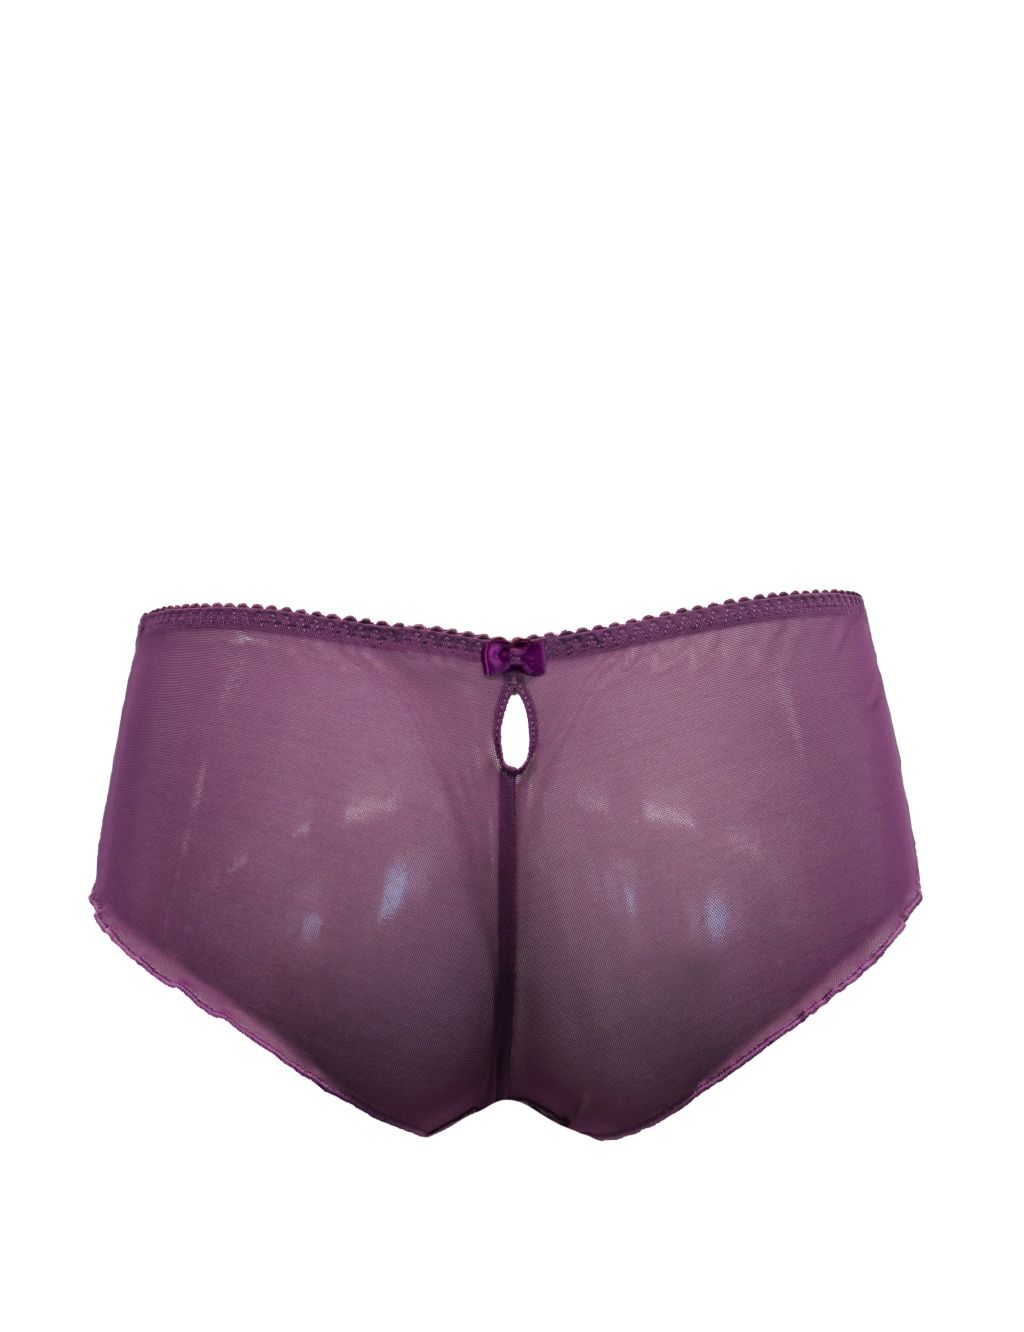 St Tropez French Knickers image 5